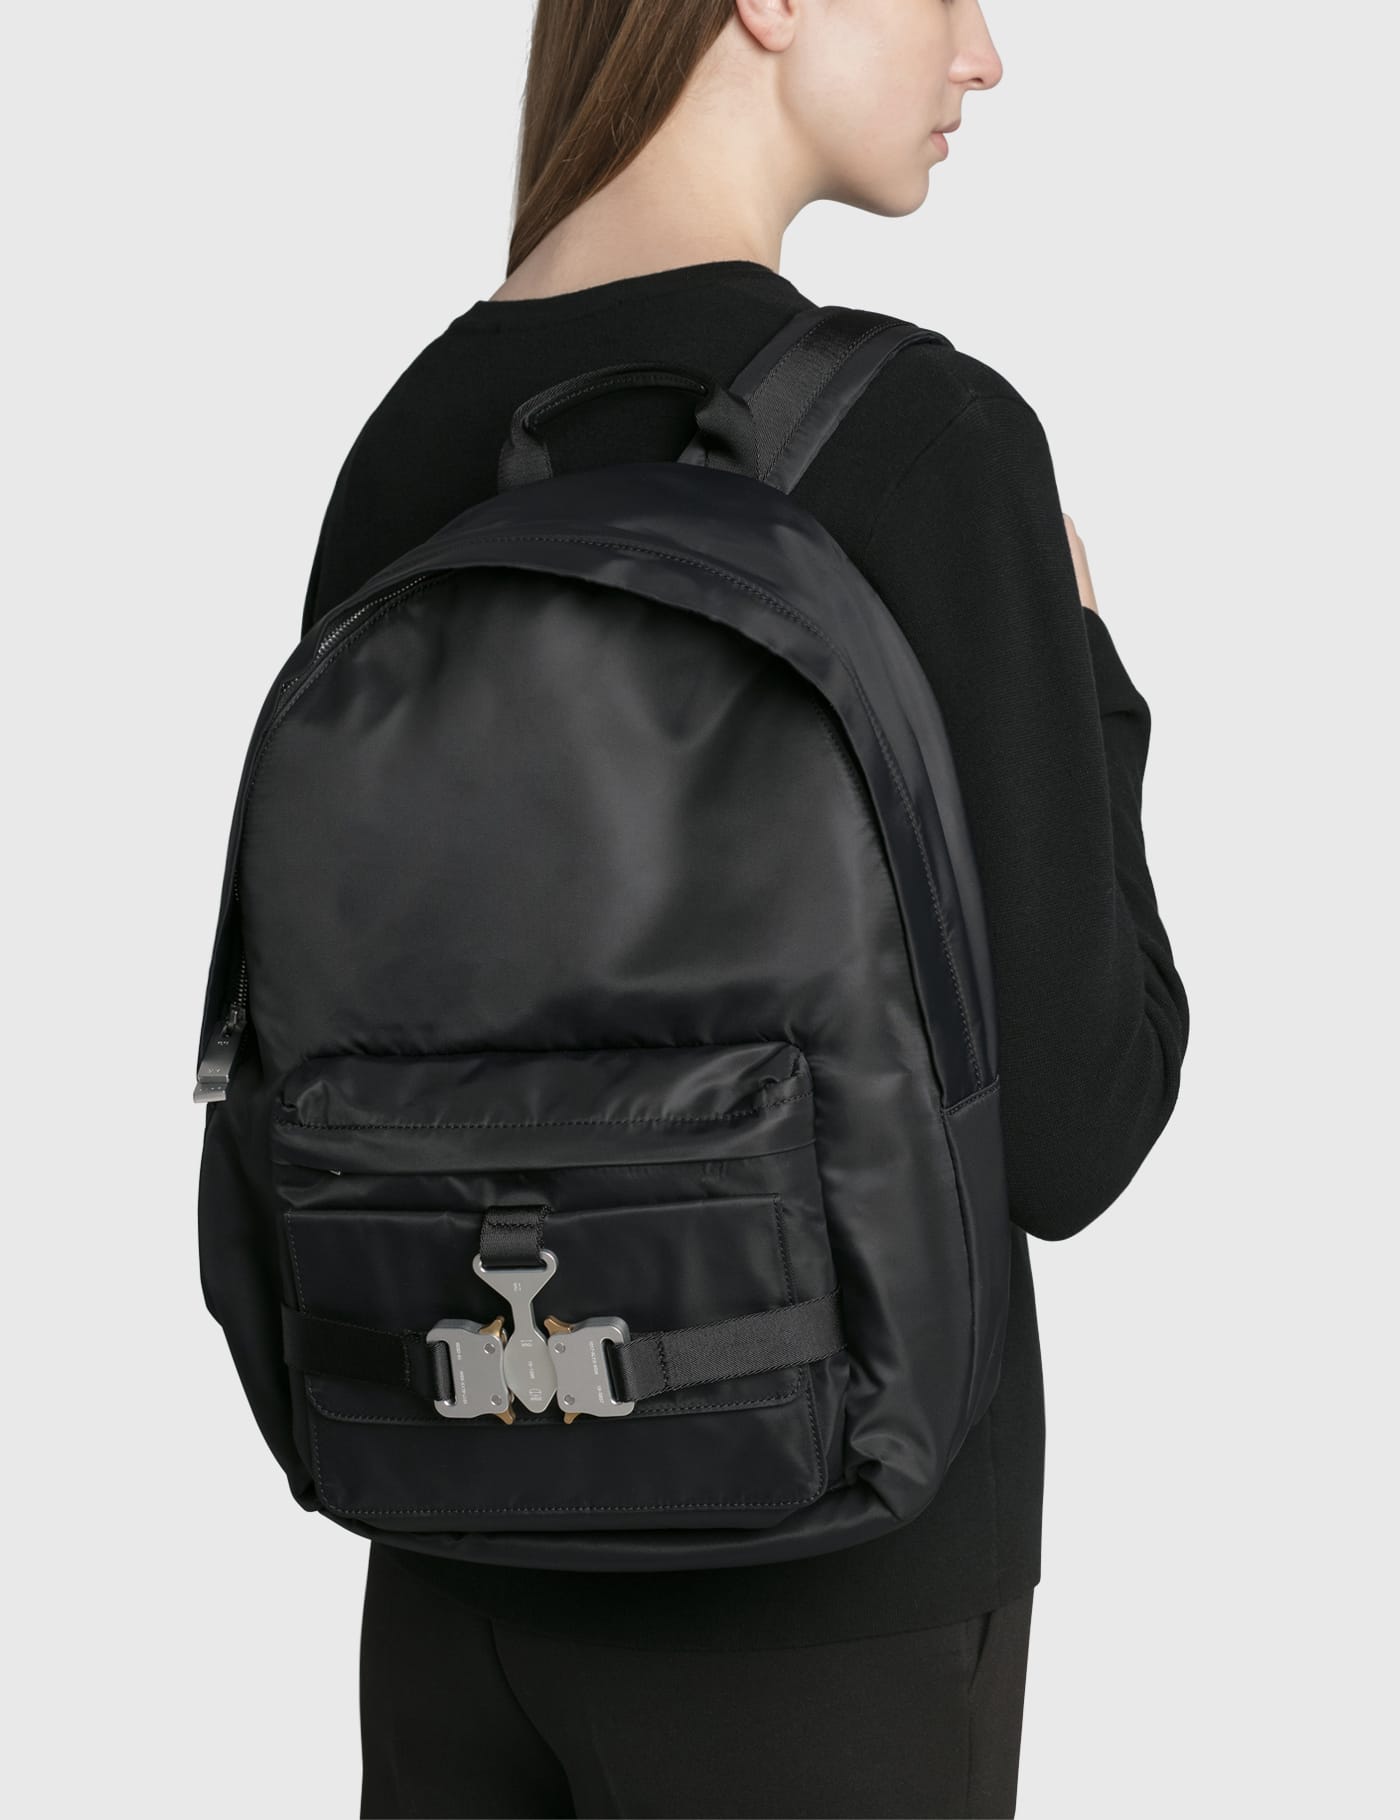 1017 ALYX 9SM - Tricon Backpack | HBX - Globally Curated Fashion 